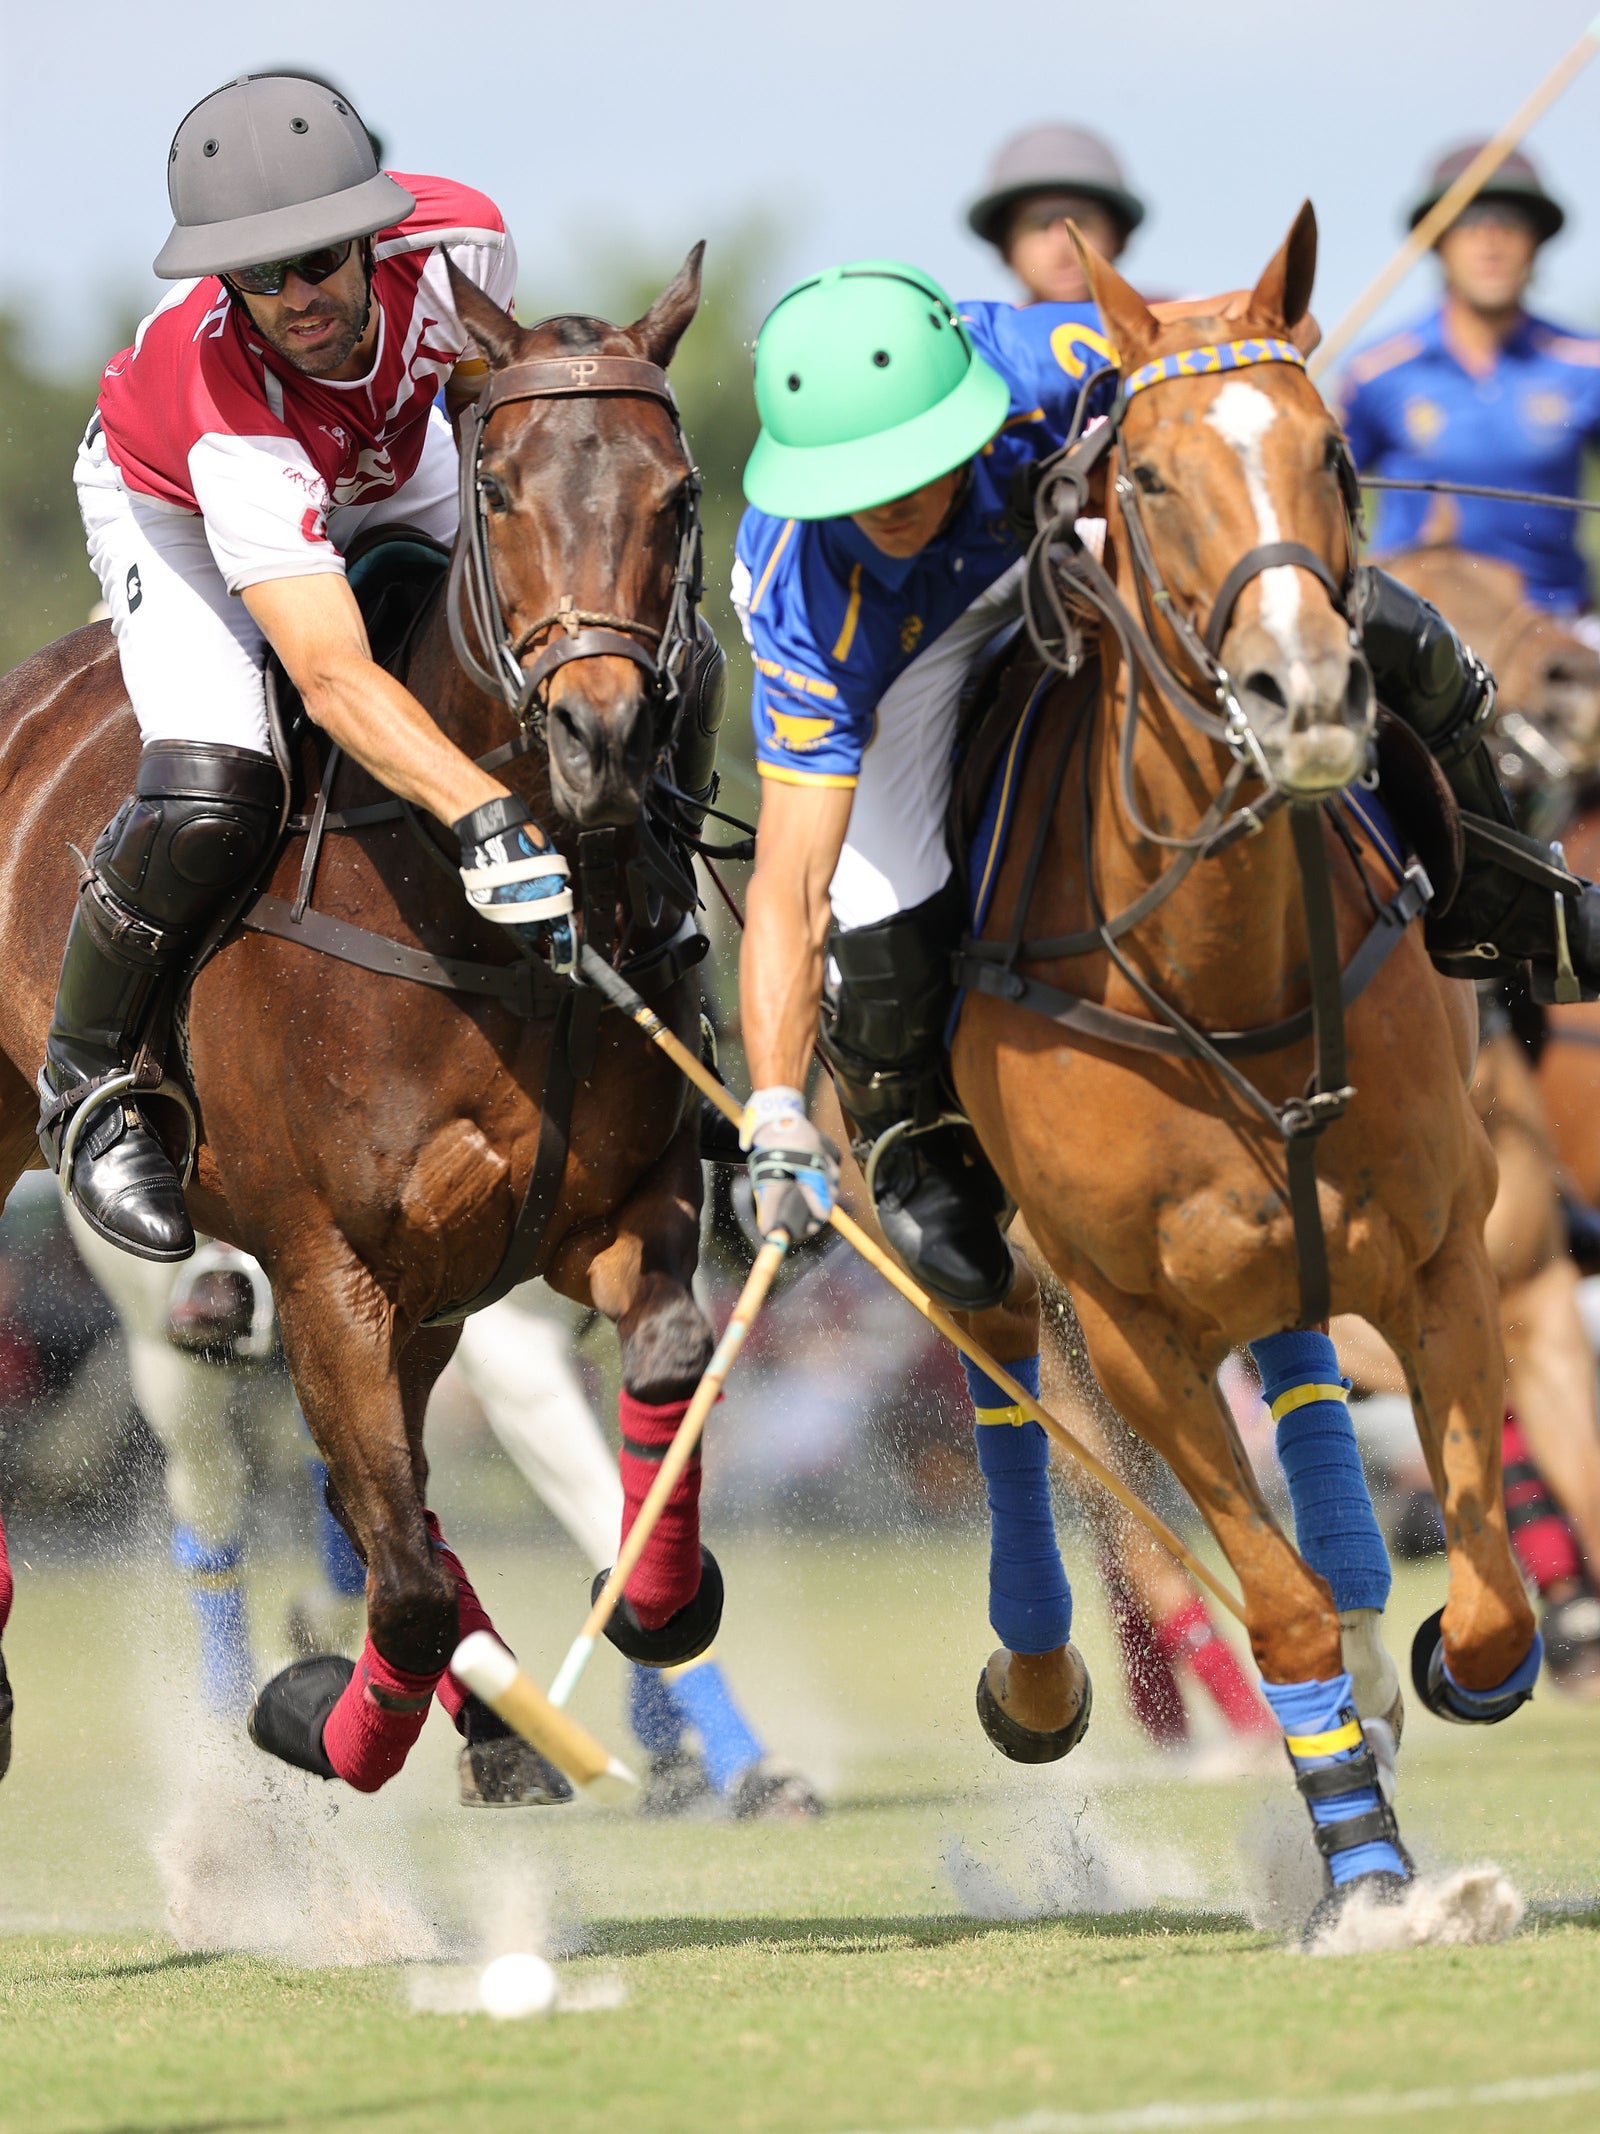 U.S. Open Arena Polo Championship Returns with Thrilling Action